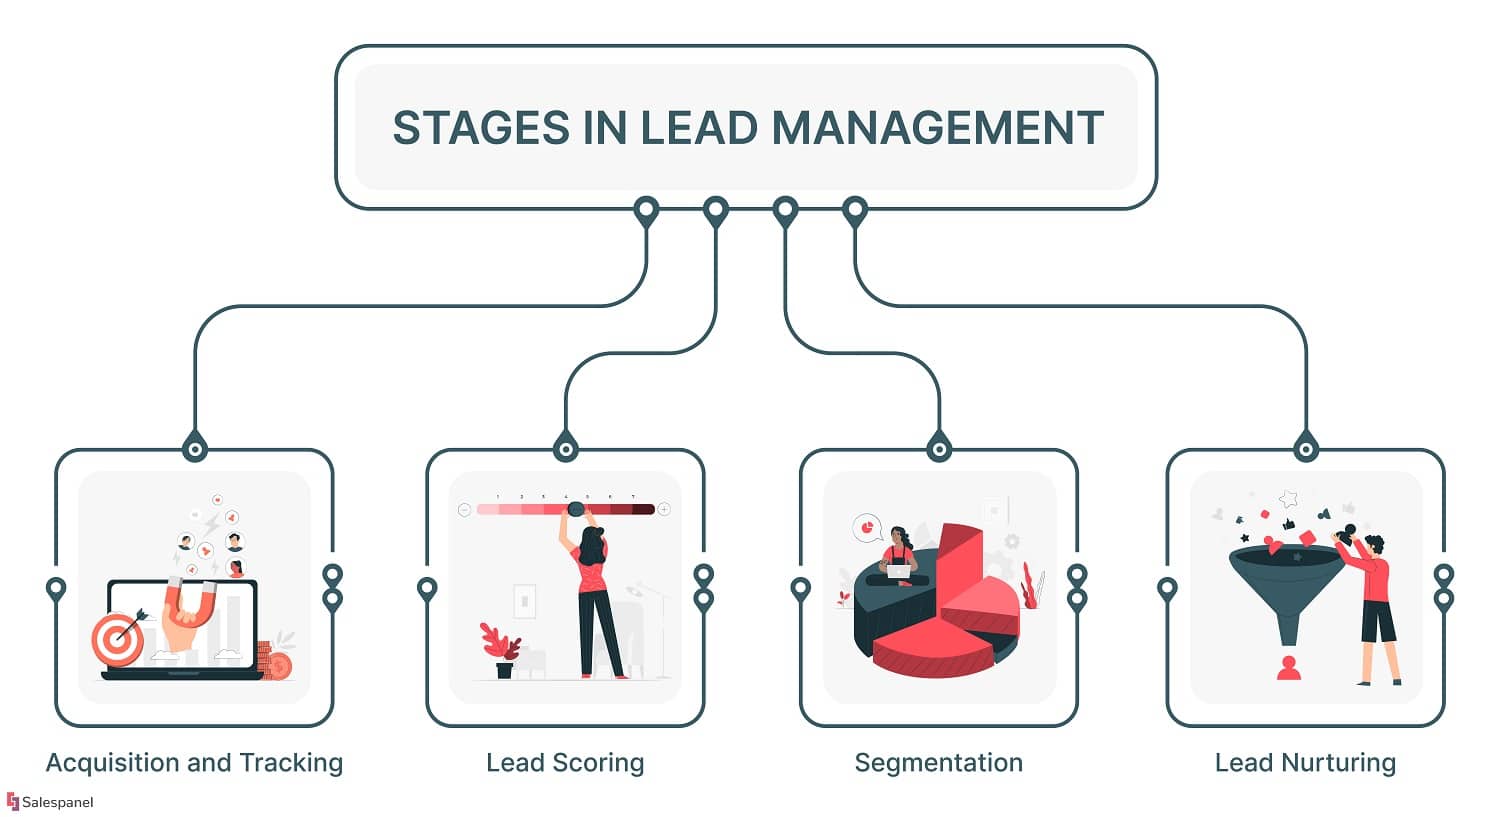 Sales - A Simple Process Miss Leads